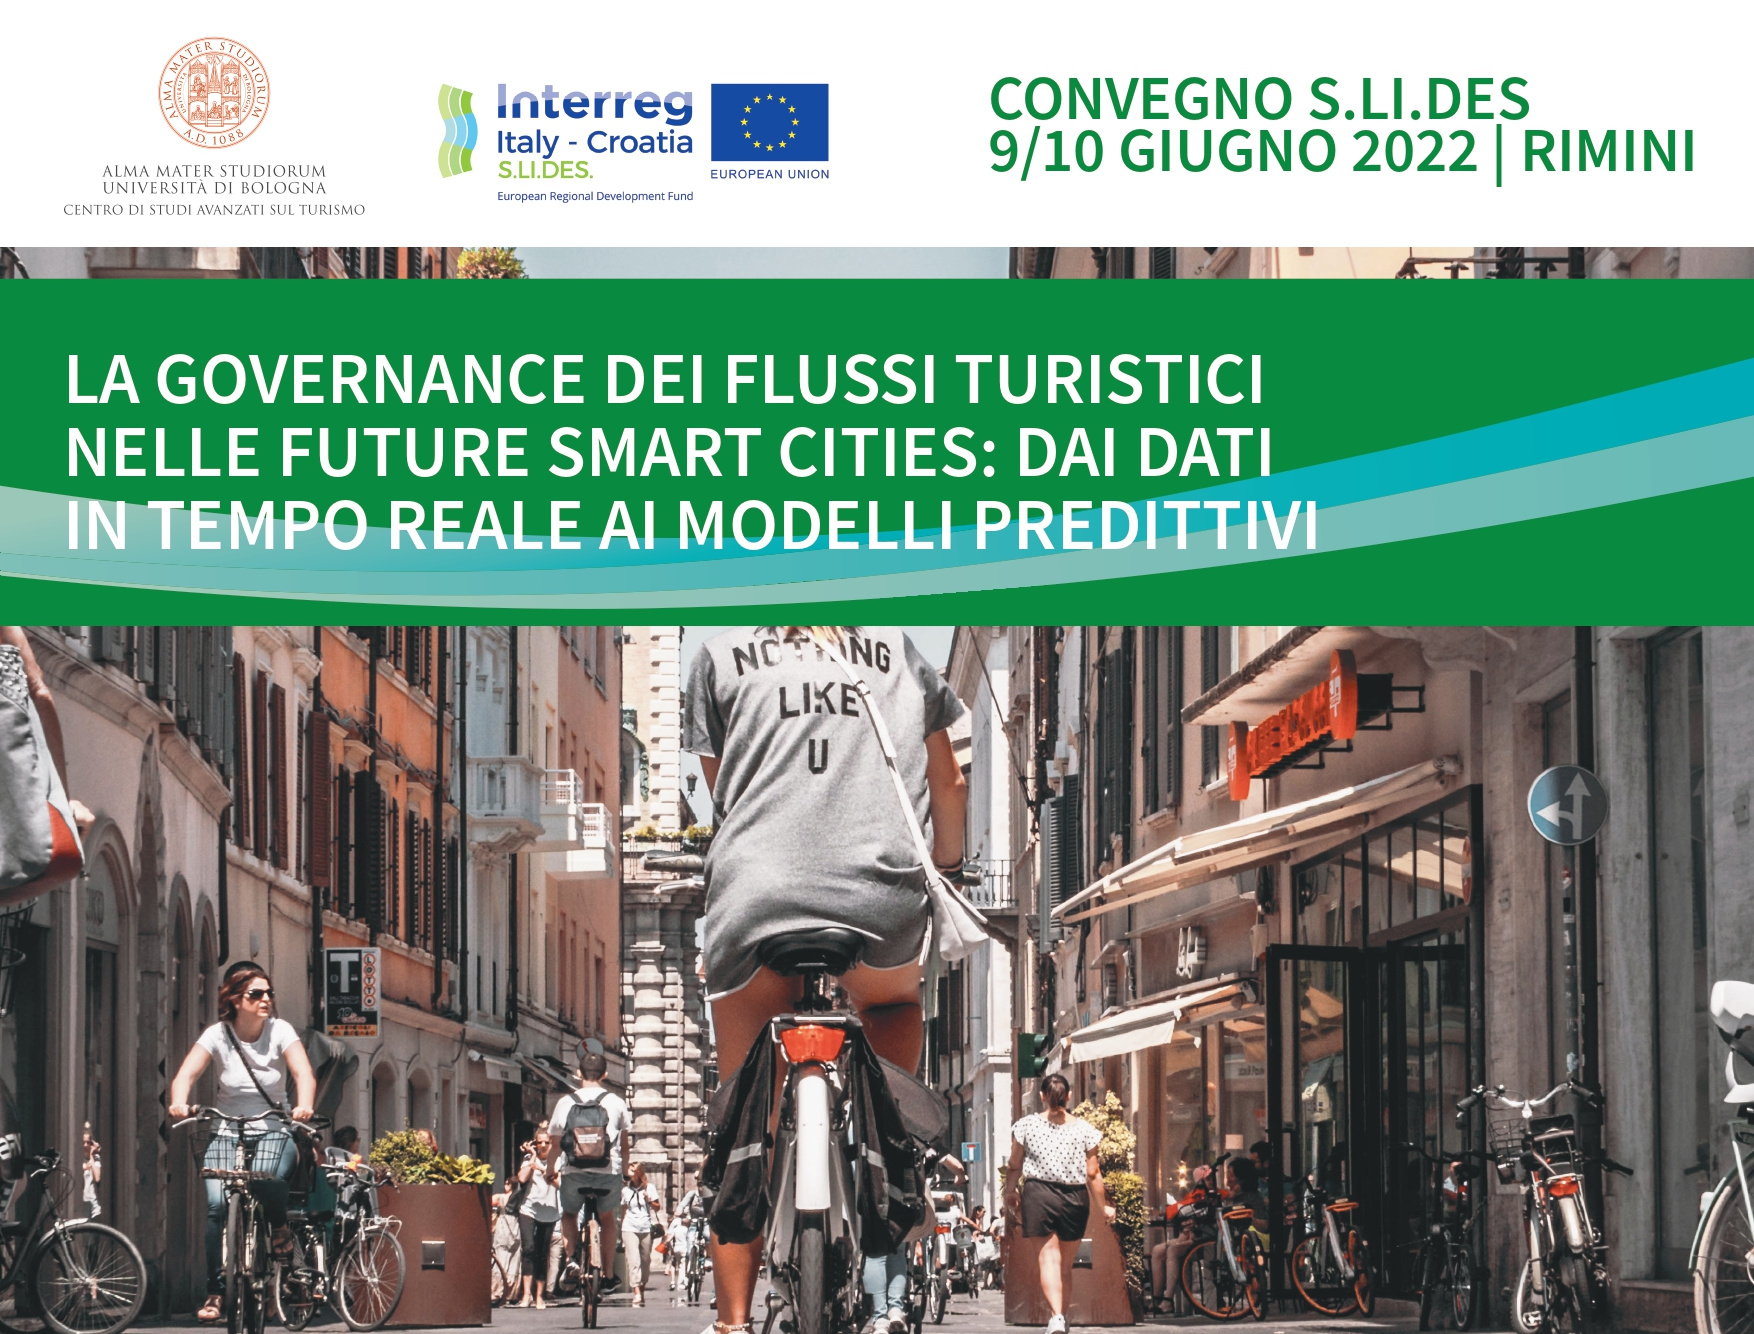 Tourist flows governance in future smart cities: from real time data to predictive models